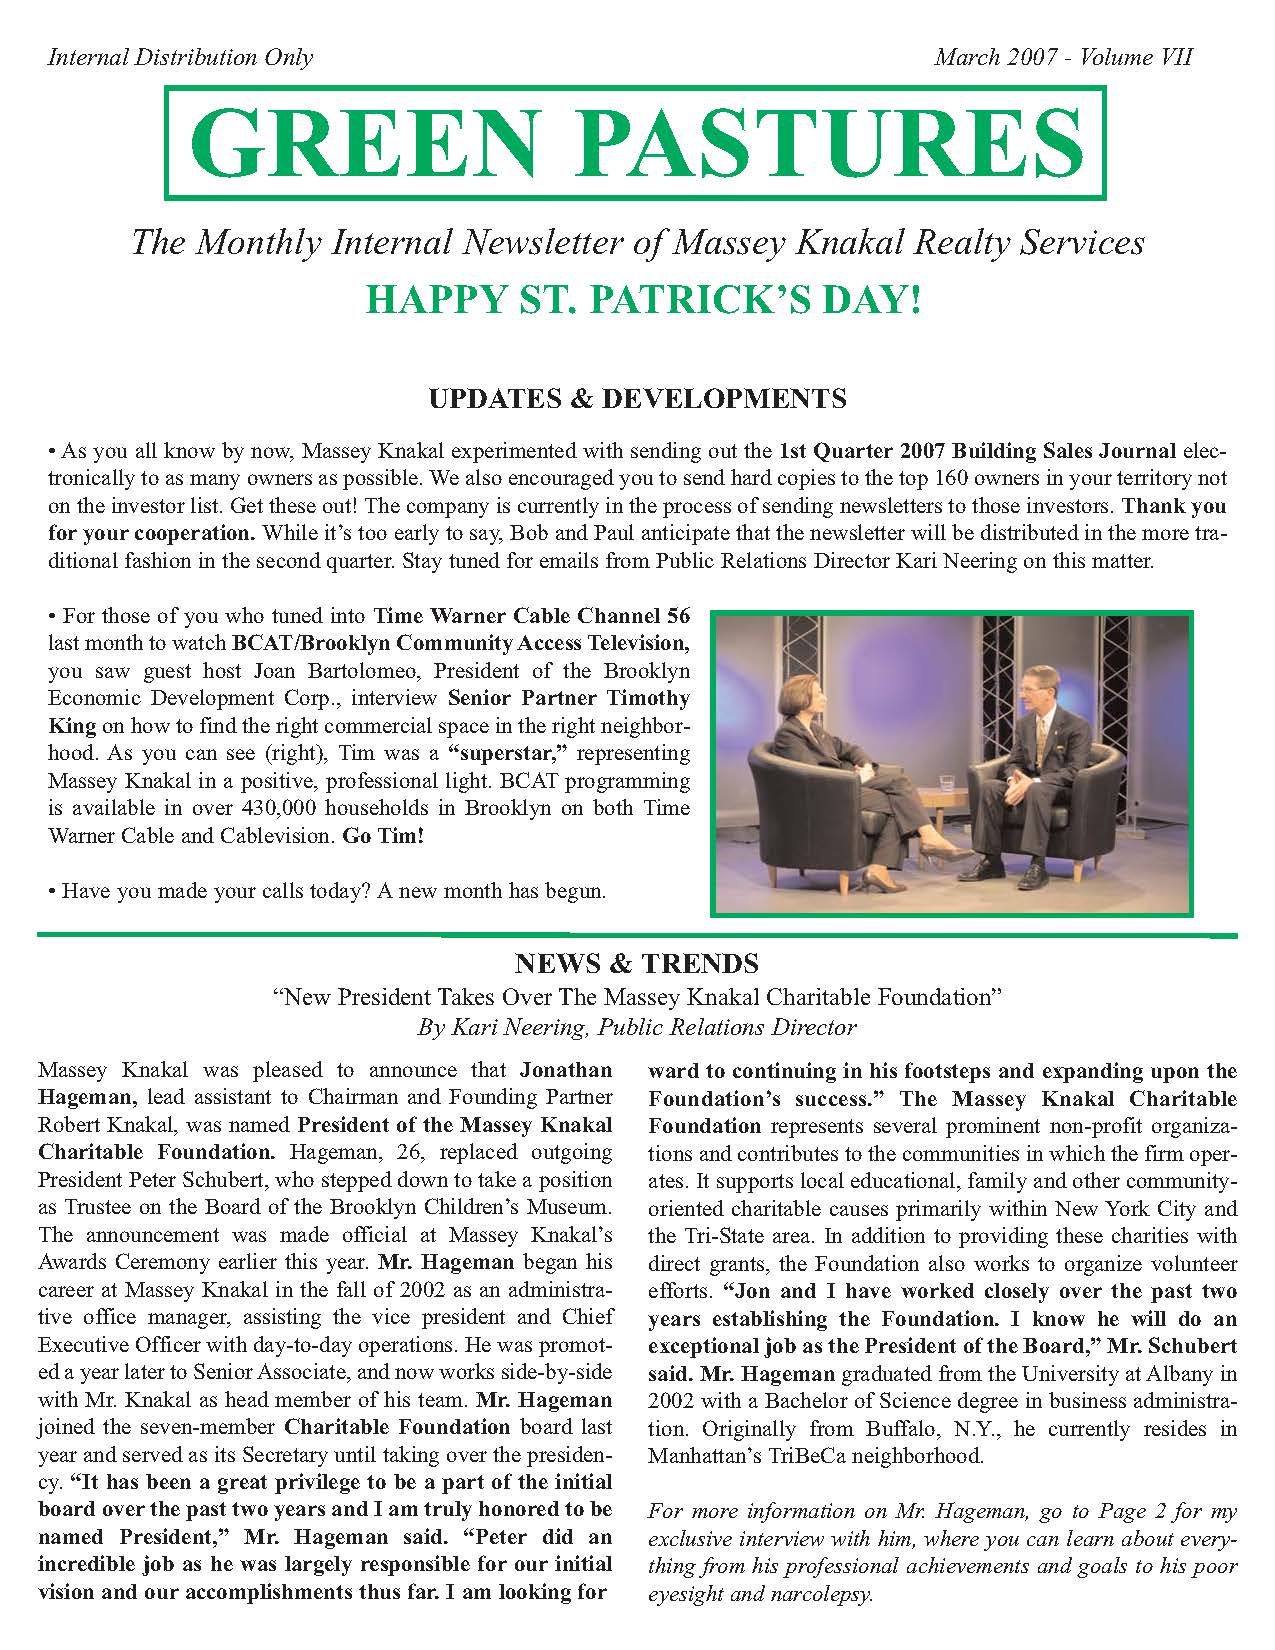 March 2007 Internal Newsletter_Page_1